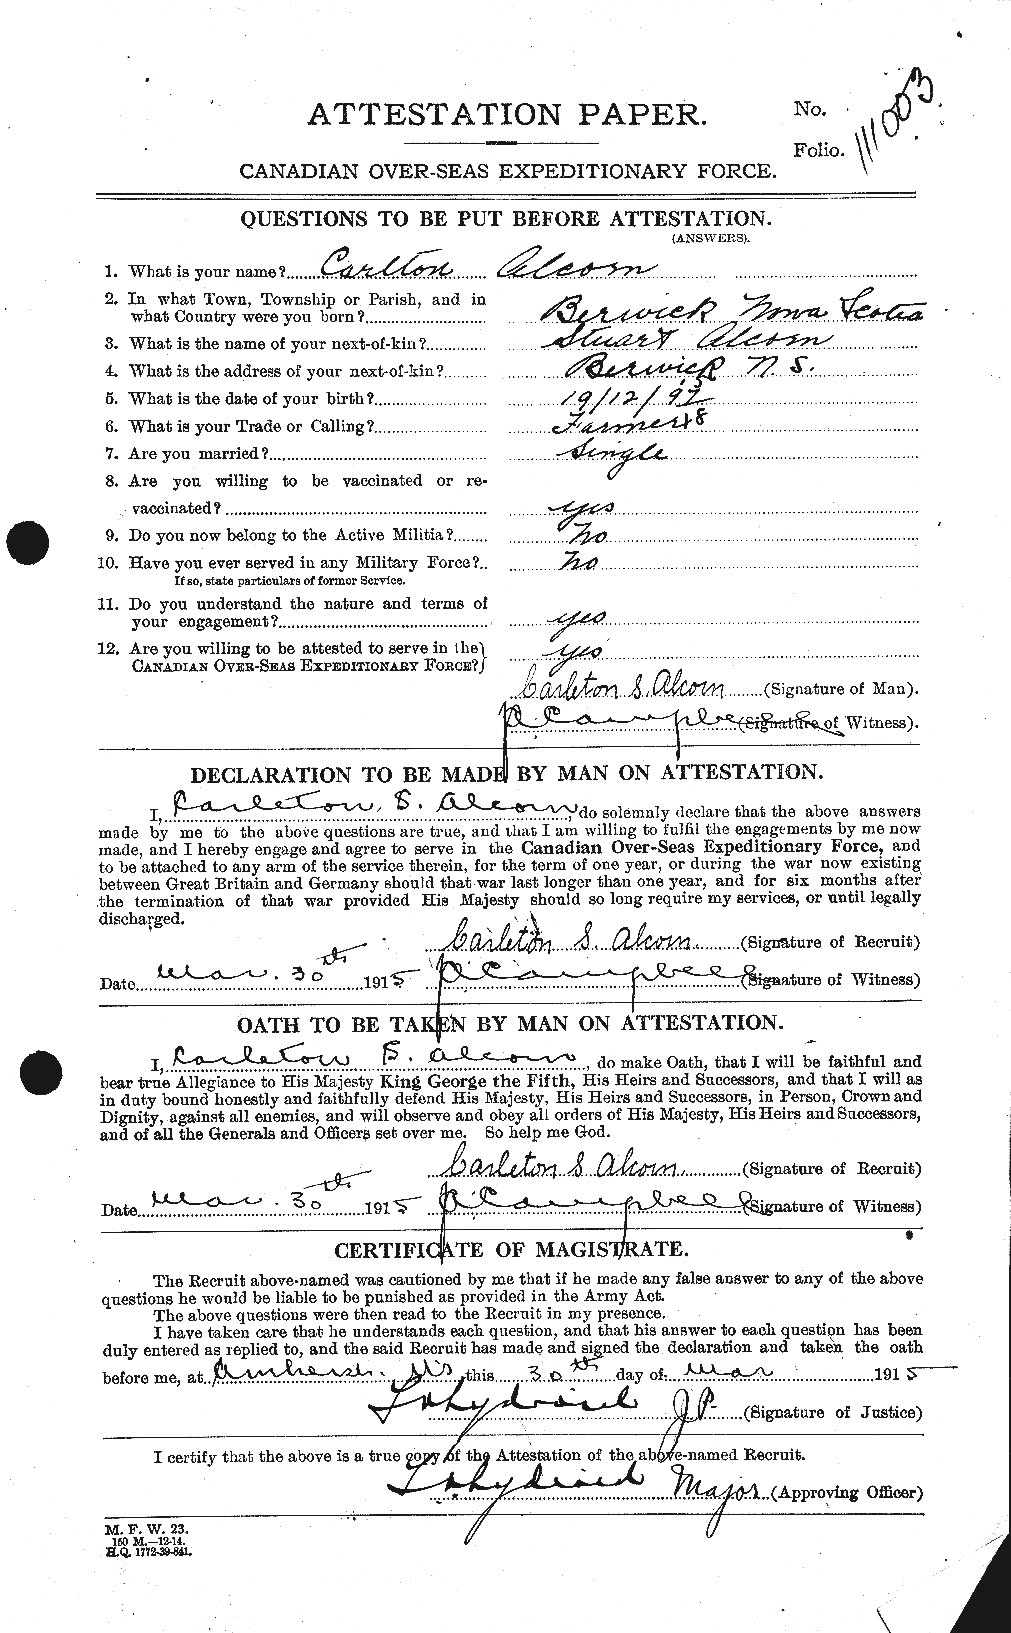 Personnel Records of the First World War - CEF 204777a